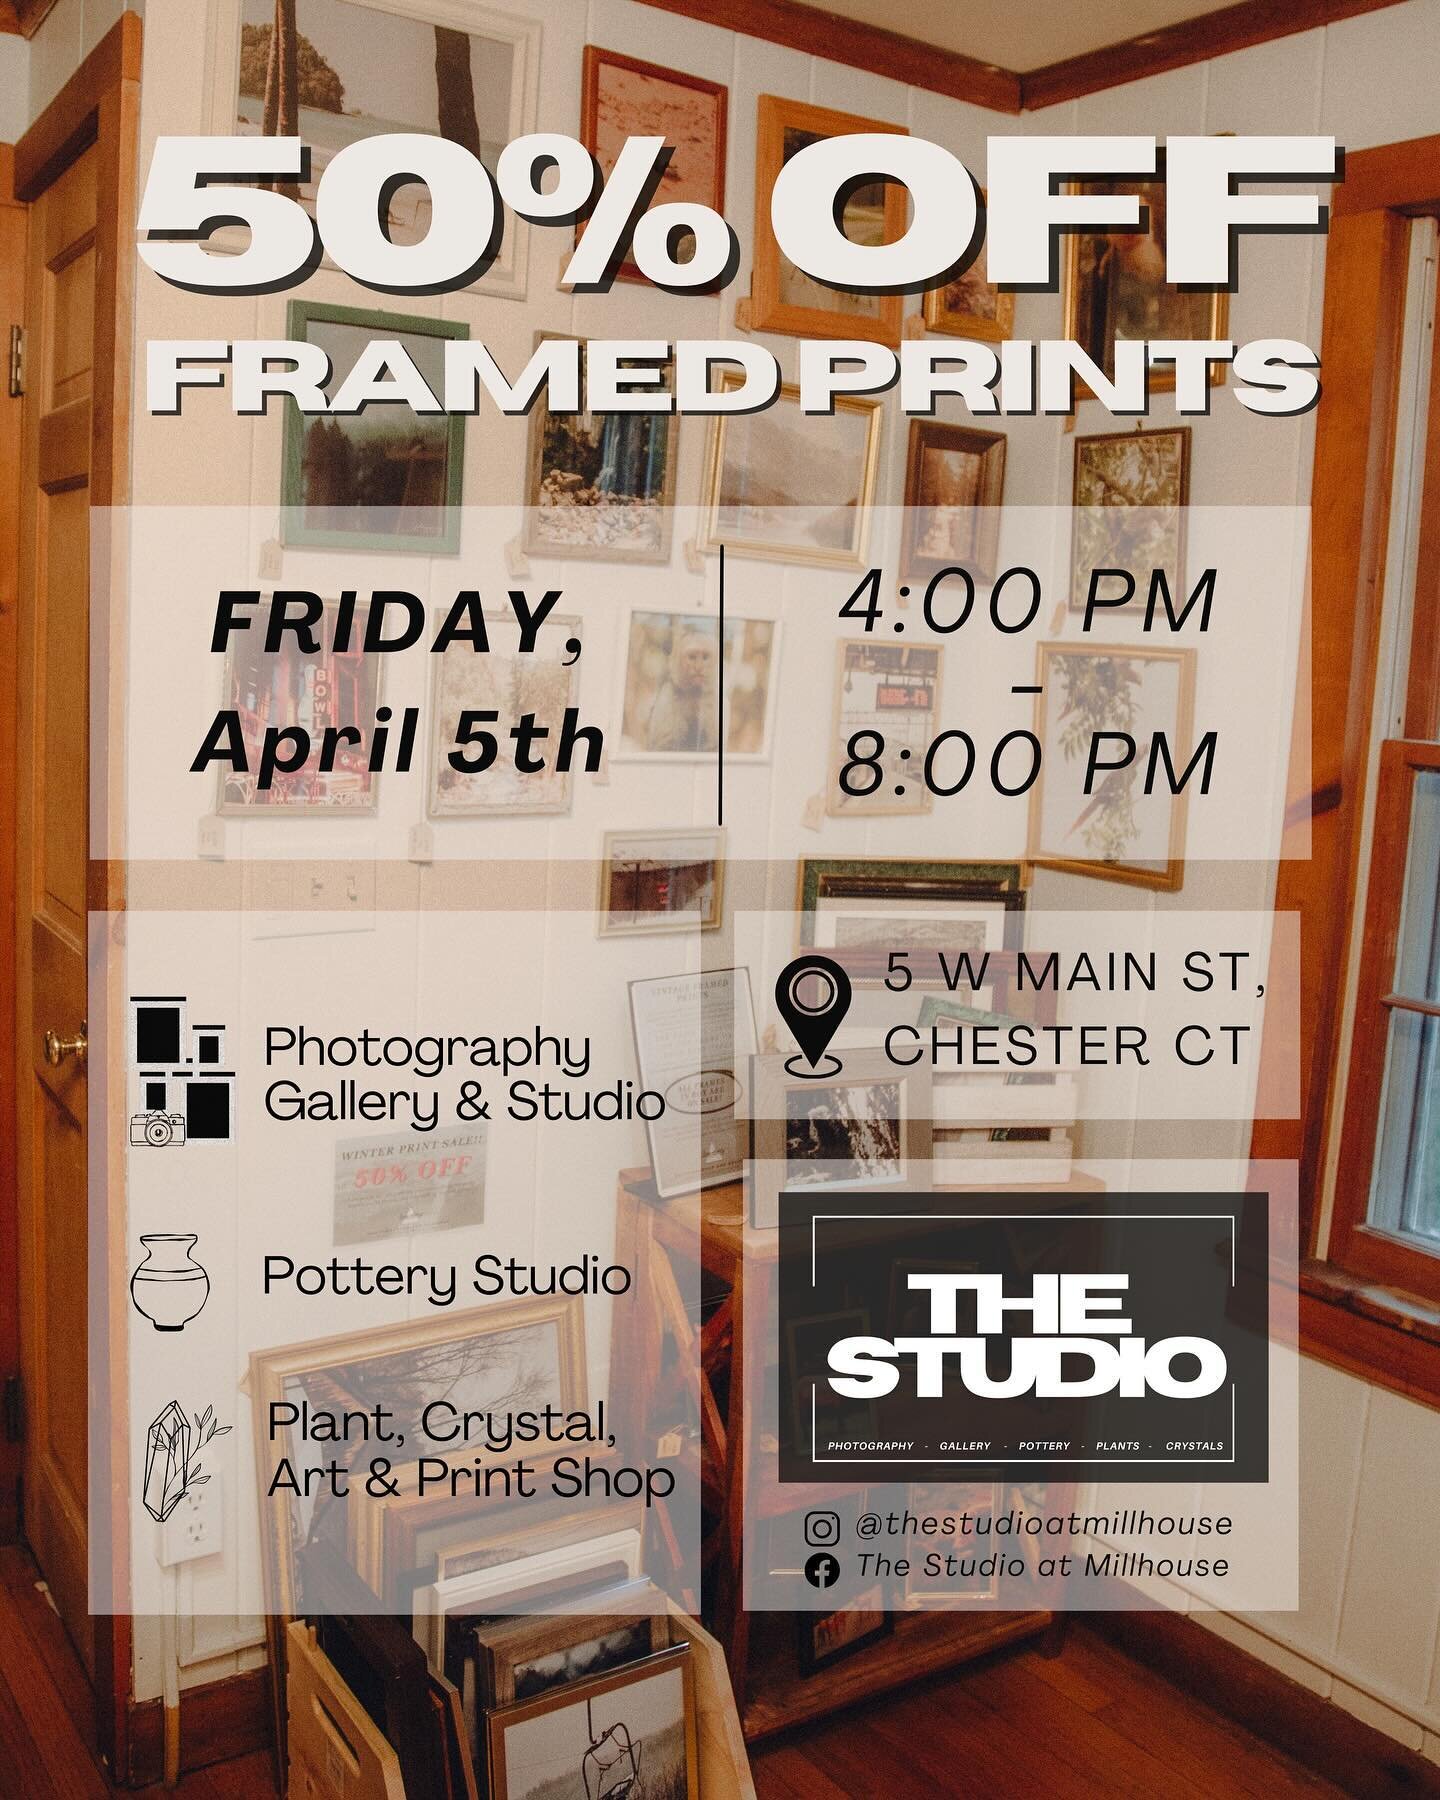 Happy First Friday!! With everything we&rsquo;ve had going on the past few weeks we won&rsquo;t be hosting an event of any sort BUT you can stop by and shop 50% off all framed prints!! TONIGHT ONLY FROM 5-8! 

We&rsquo;ll be there getting ready for o